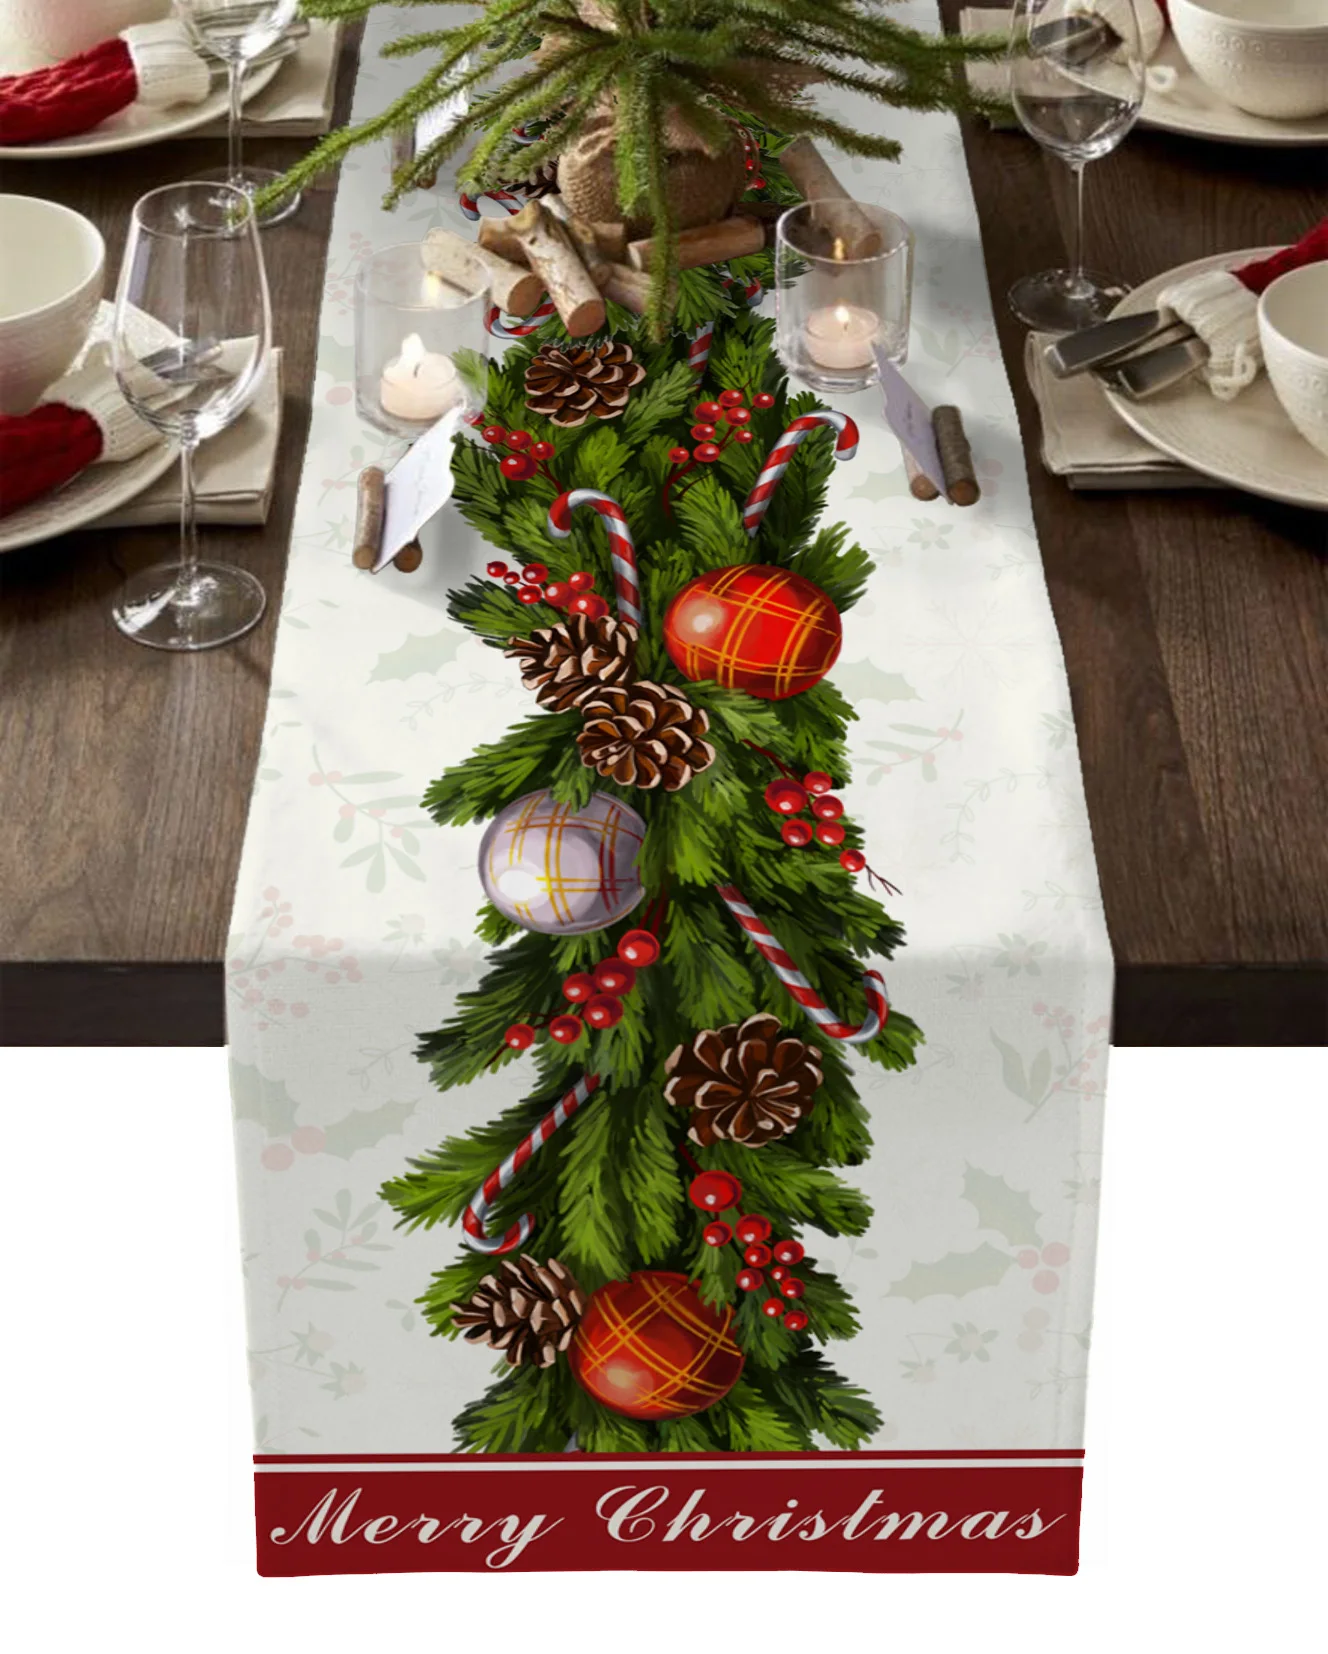 

Christmas Balls Berries Pine Tree Pine Cones Table Runner Wedding Party Dining Table Cover Placemat Napkin Home Kitchen Decor